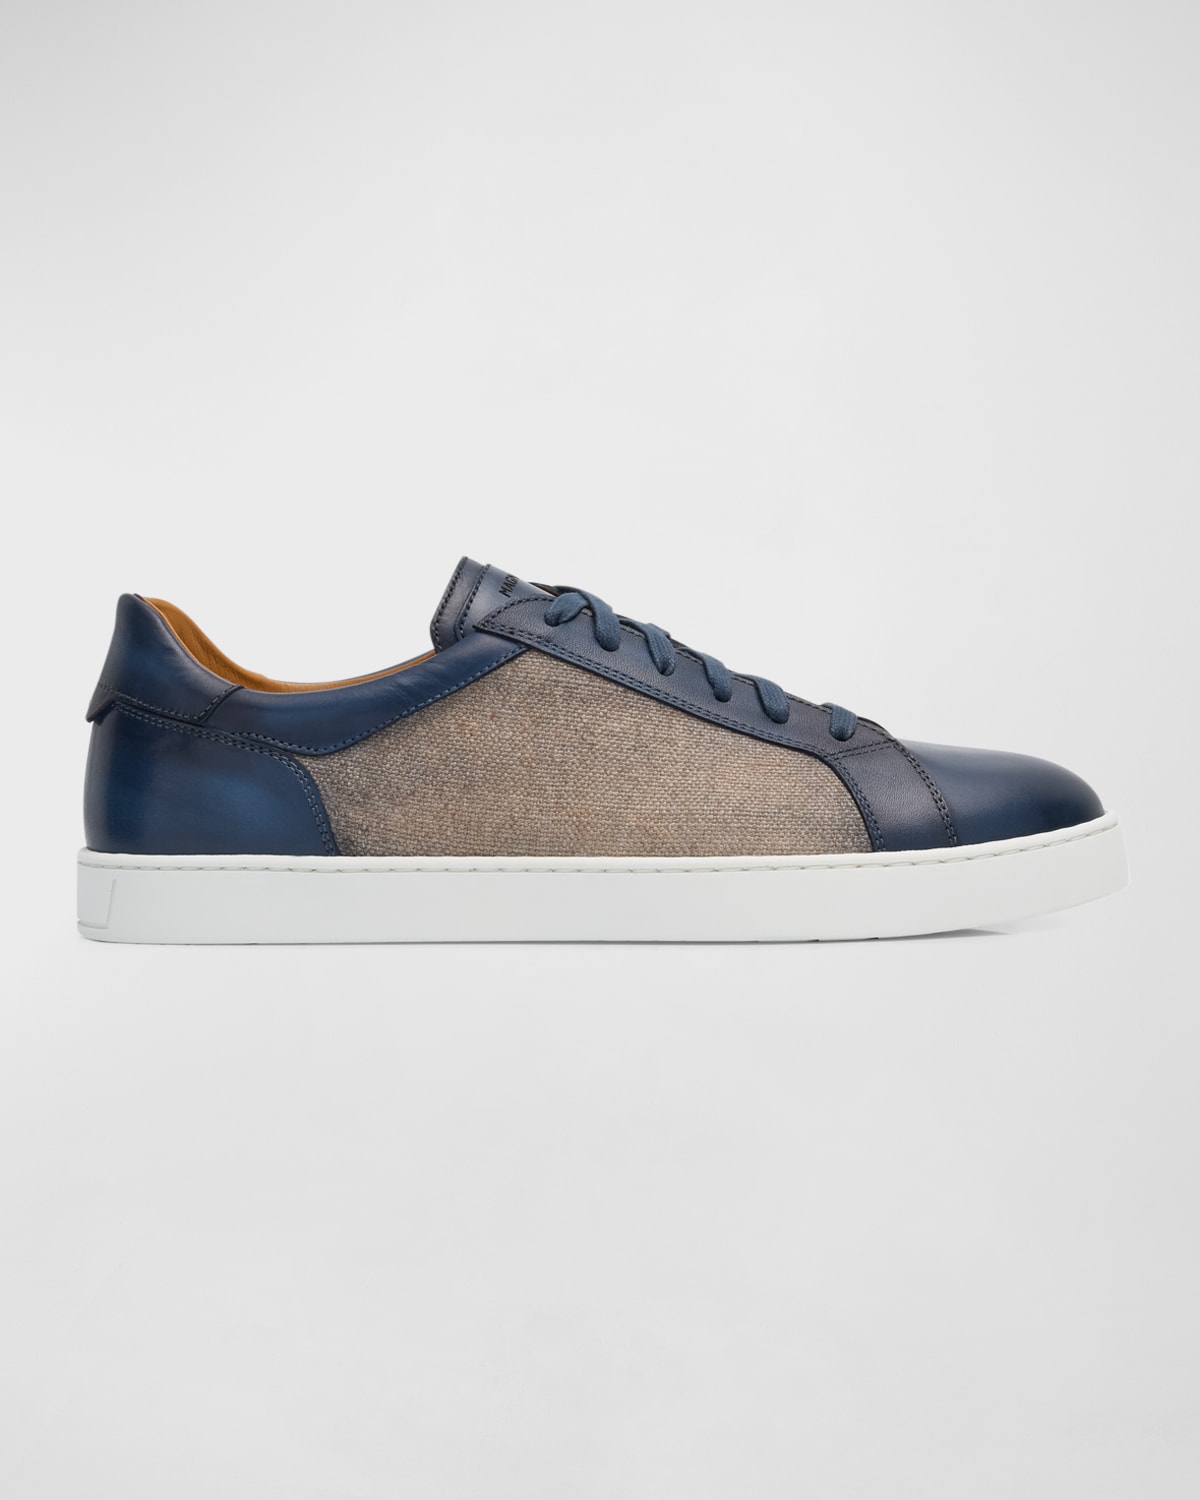 Men's Wyland Linen and Leather Low-Top Sneakers